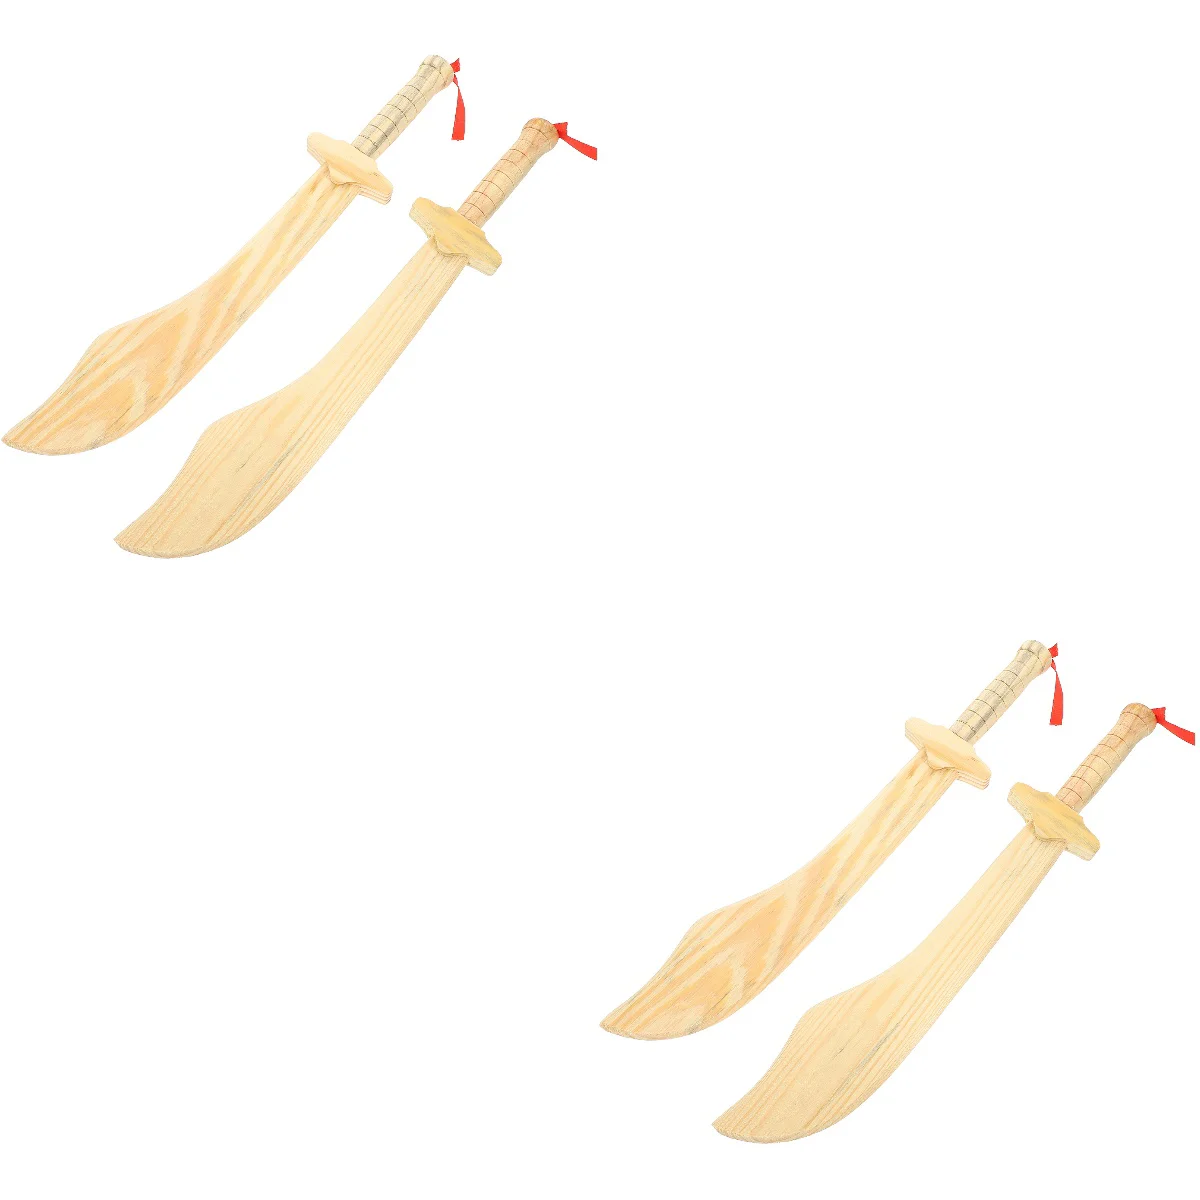 

4 Pcs Wooden Toy Adventure Sword Portable Children Toys Small Swords Boys Play Plaything Kids